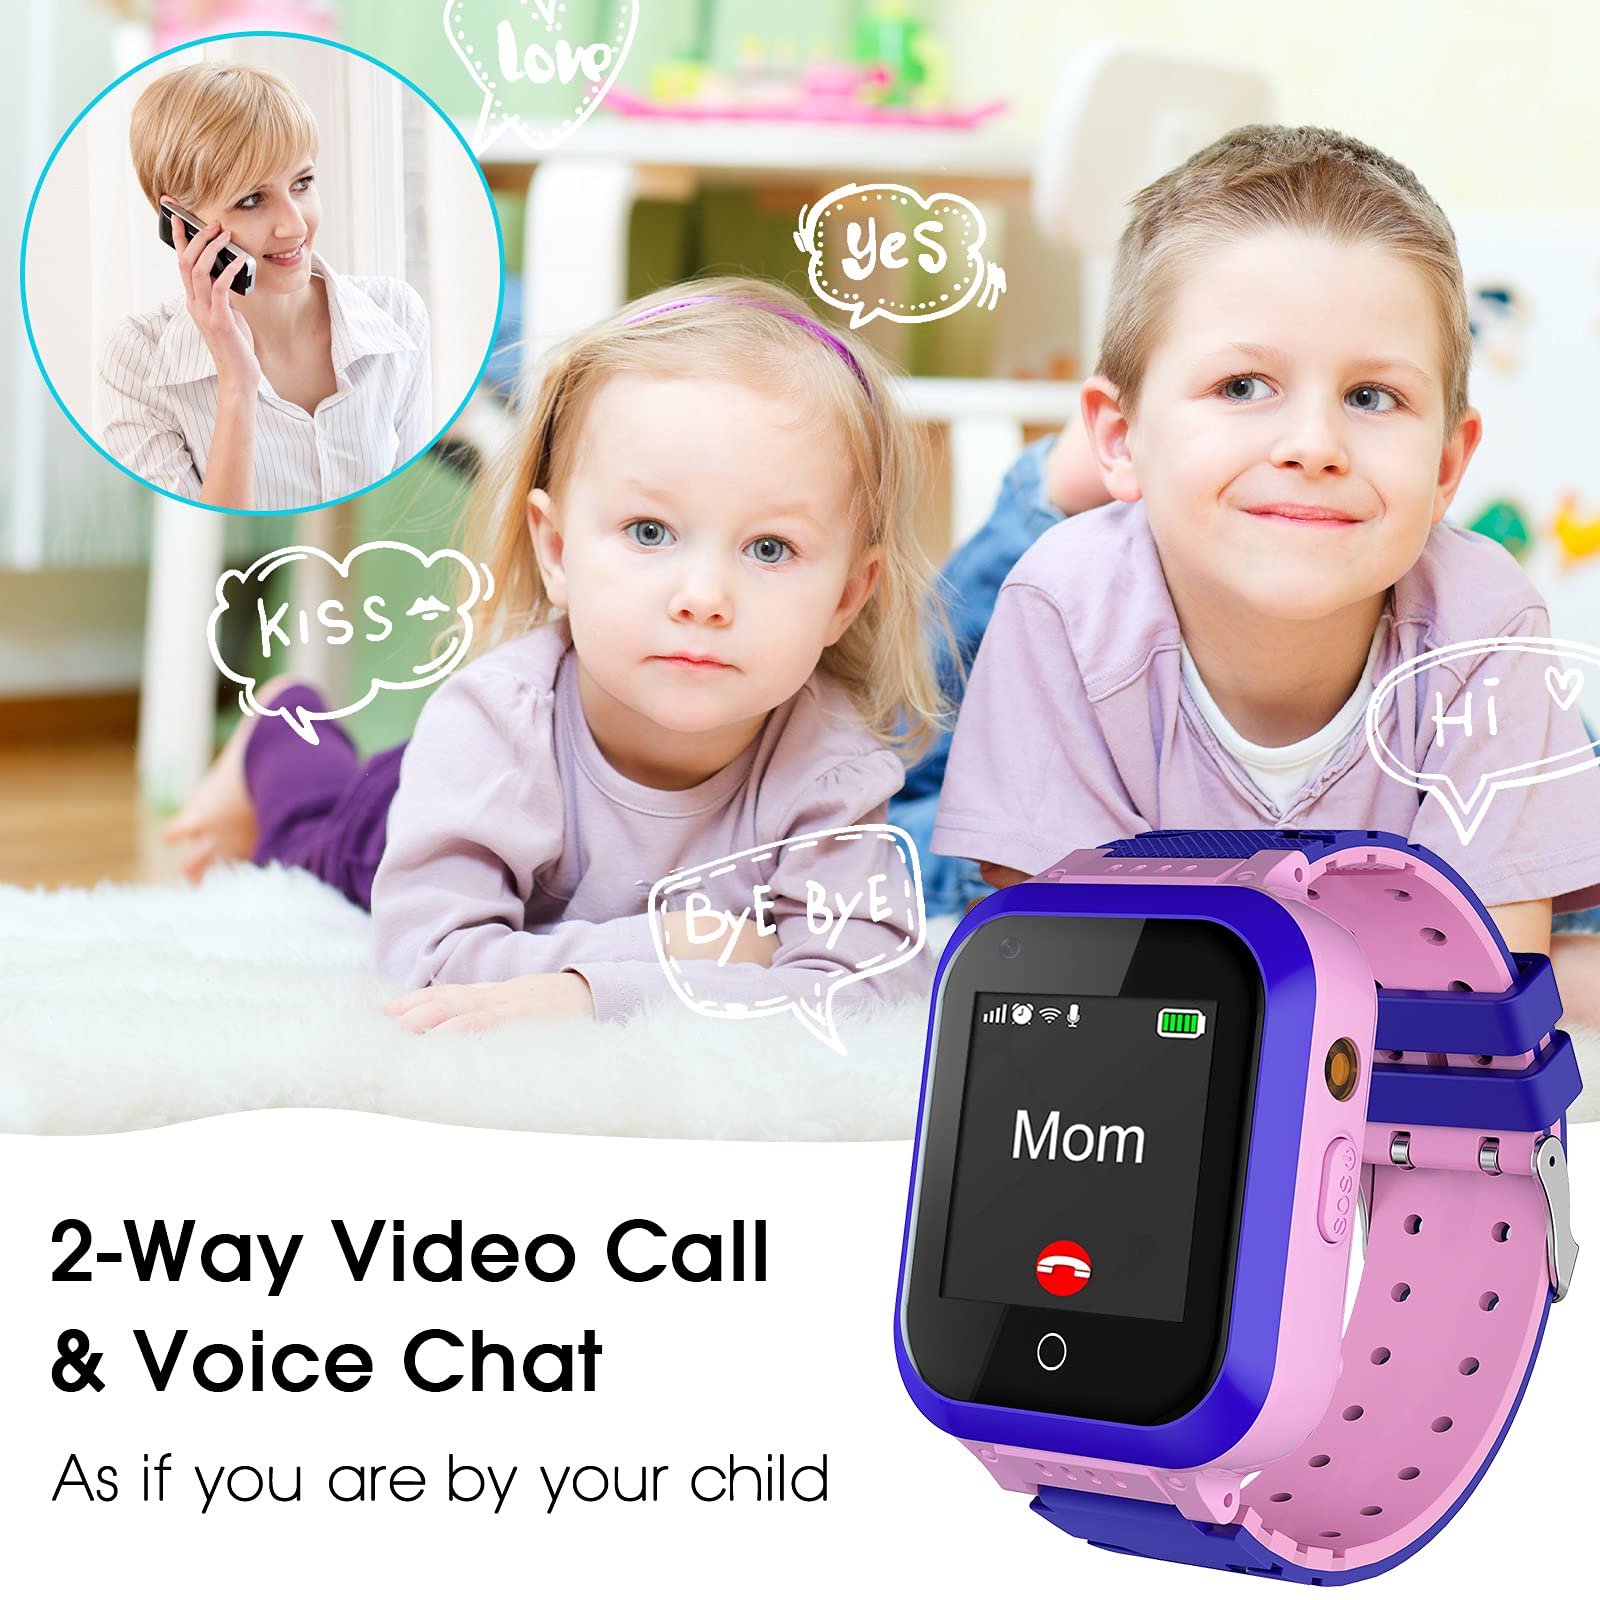 cjc 4G Kids Smartwatch, Smart Watch for Kids, IP67 Waterproof Watches with GPS Tracker, 2 Way Call Camera Voice & Video Call SOS Alerts Pedometer WiFi Wrist Watch, 3-12 Years Boys Girls Gifts